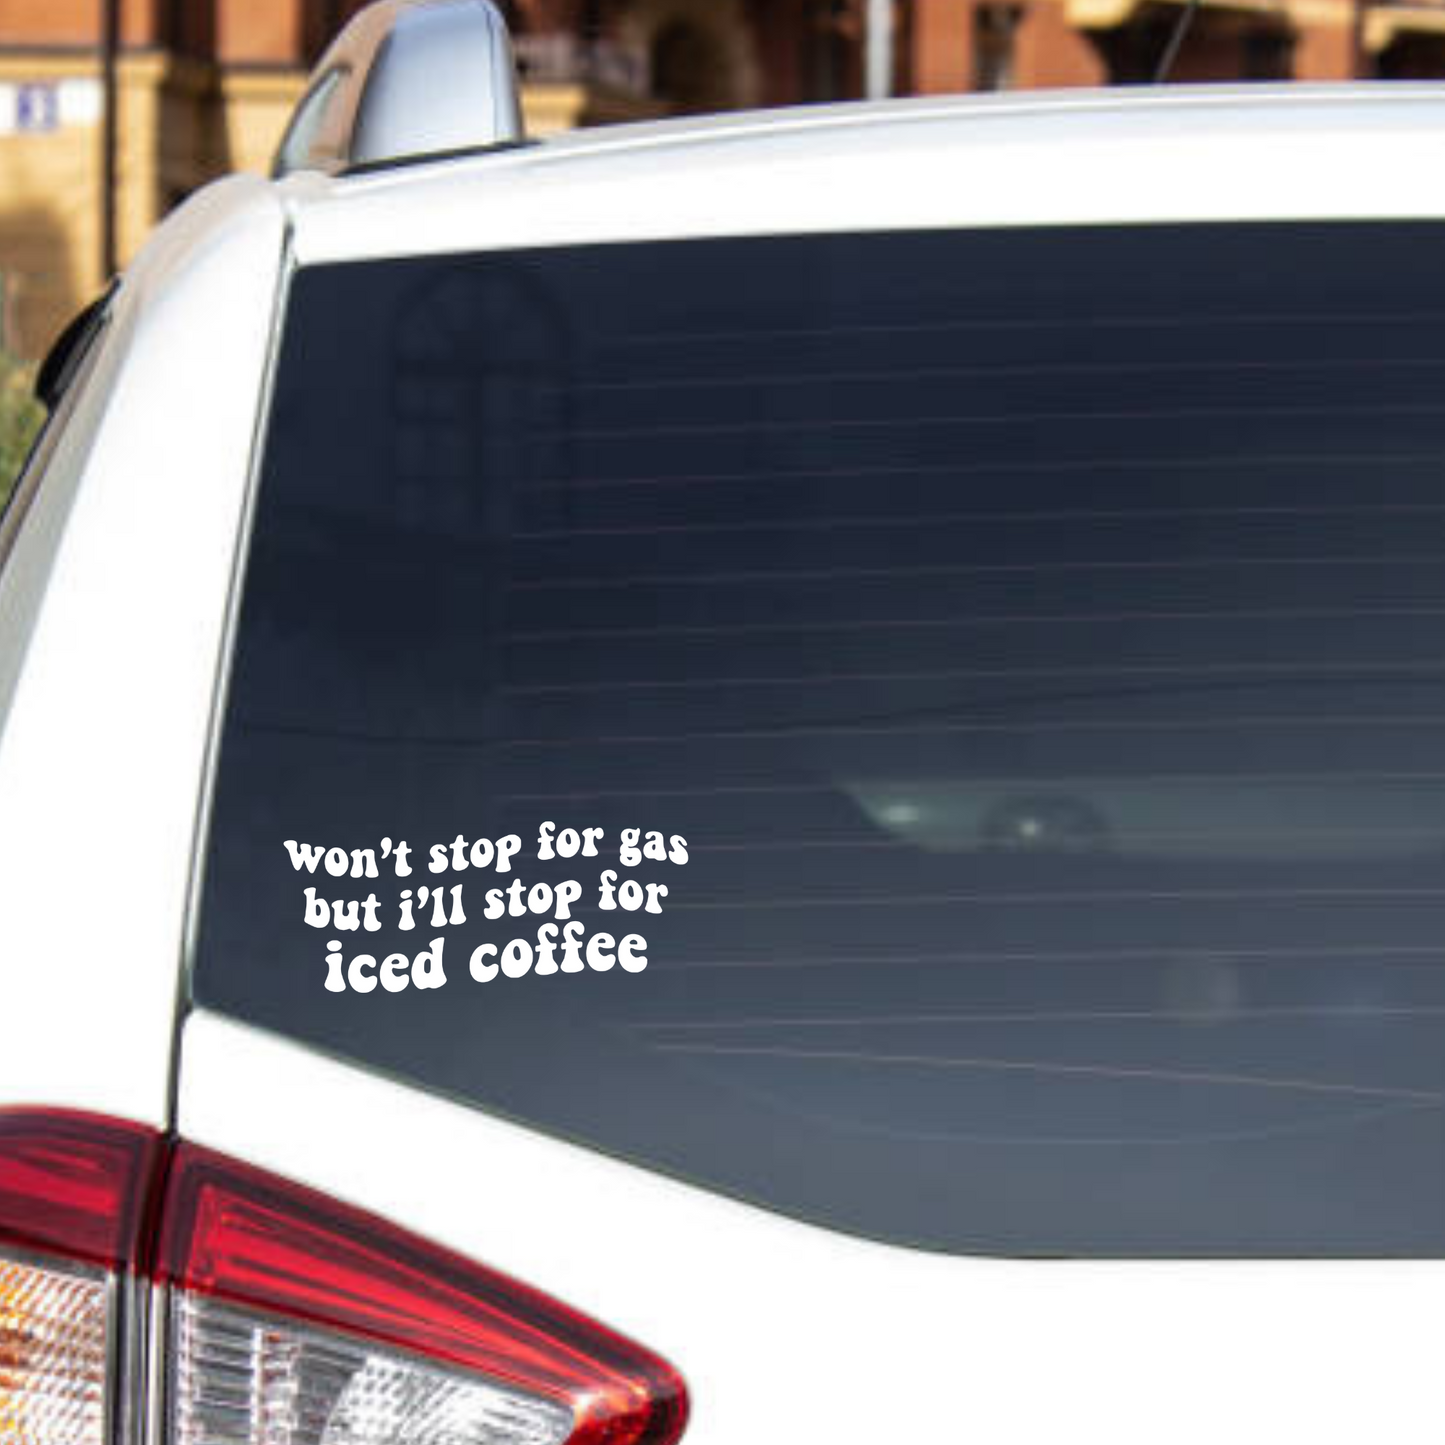 Car window decal - Humor and Inspiration